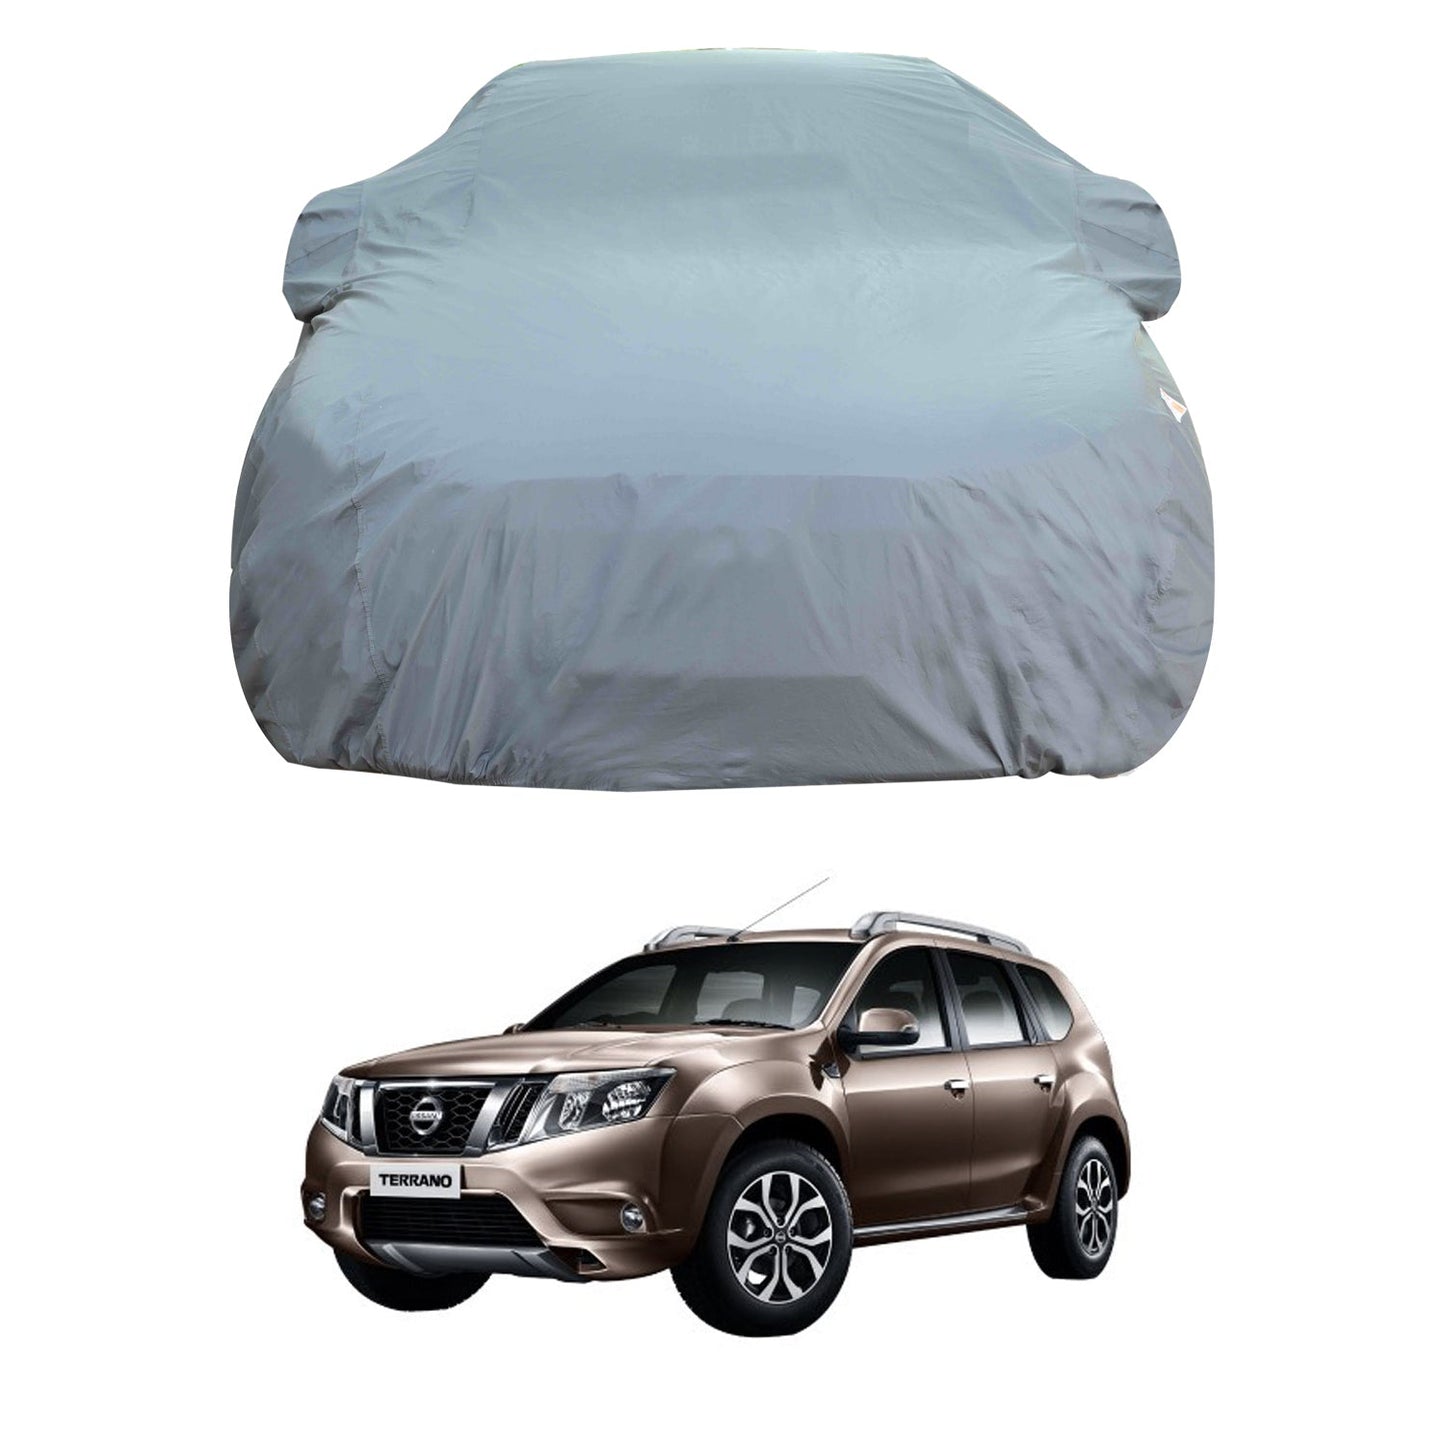 Oshotto Dark Grey 100% Anti Reflective, dustproof and Water Proof Car Body Cover with Mirror Pocket For Nissan Terrano